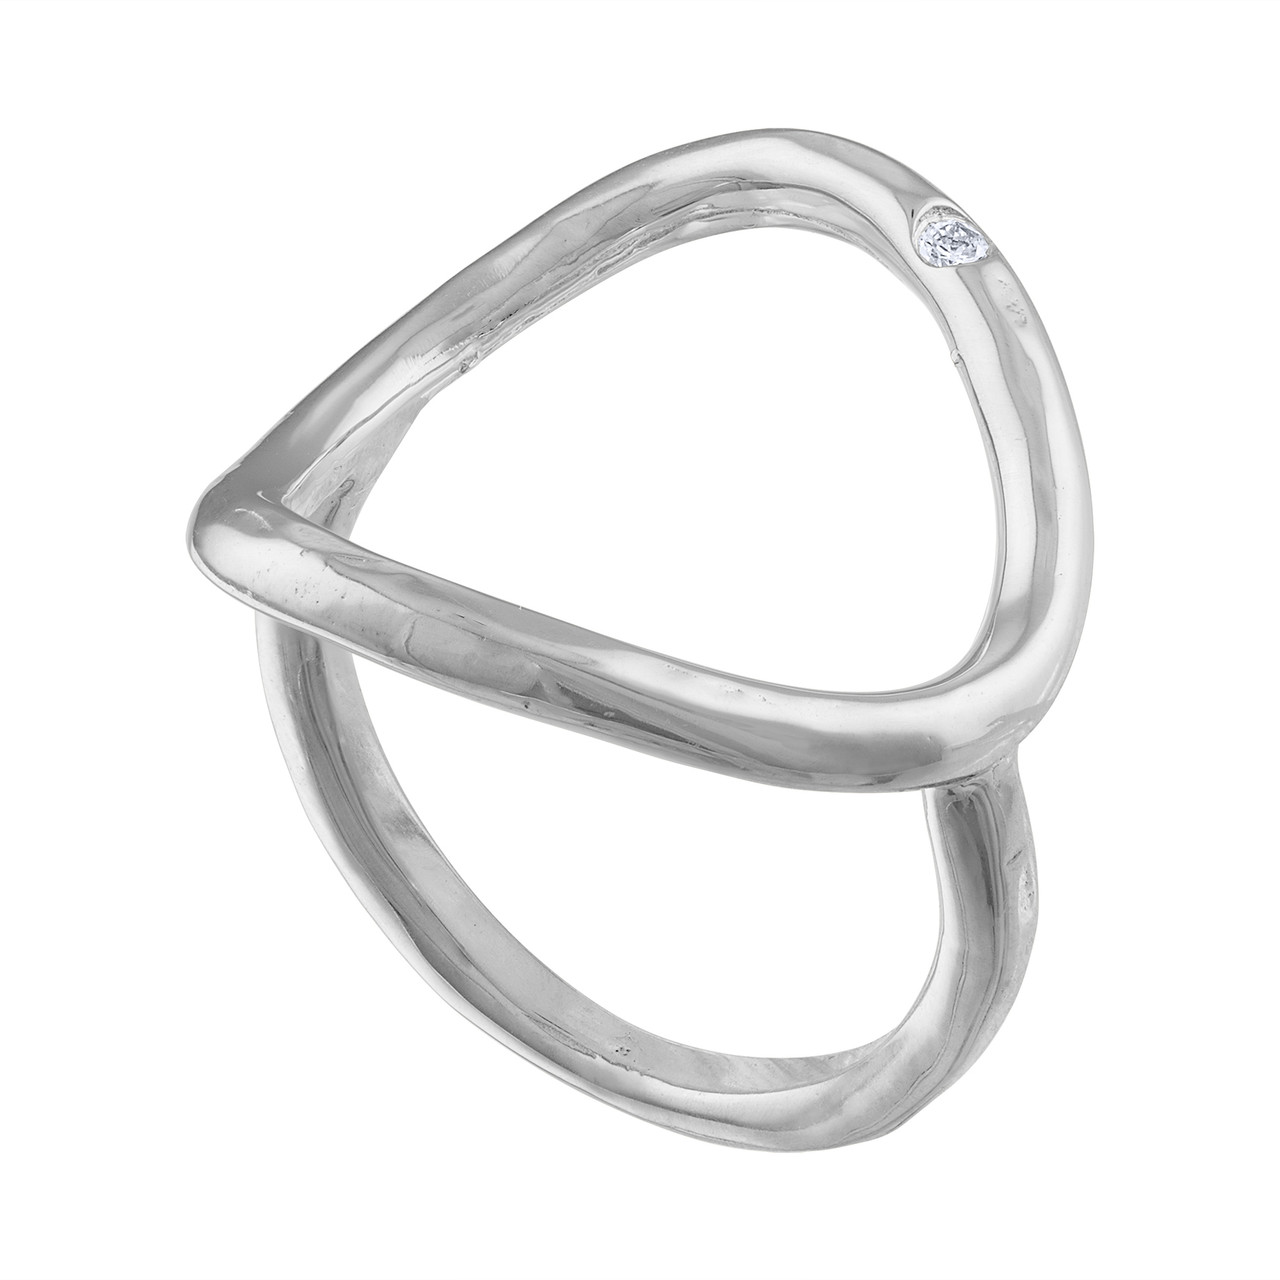 Silver Middle Finger Ring | Allie Keast Jewelry